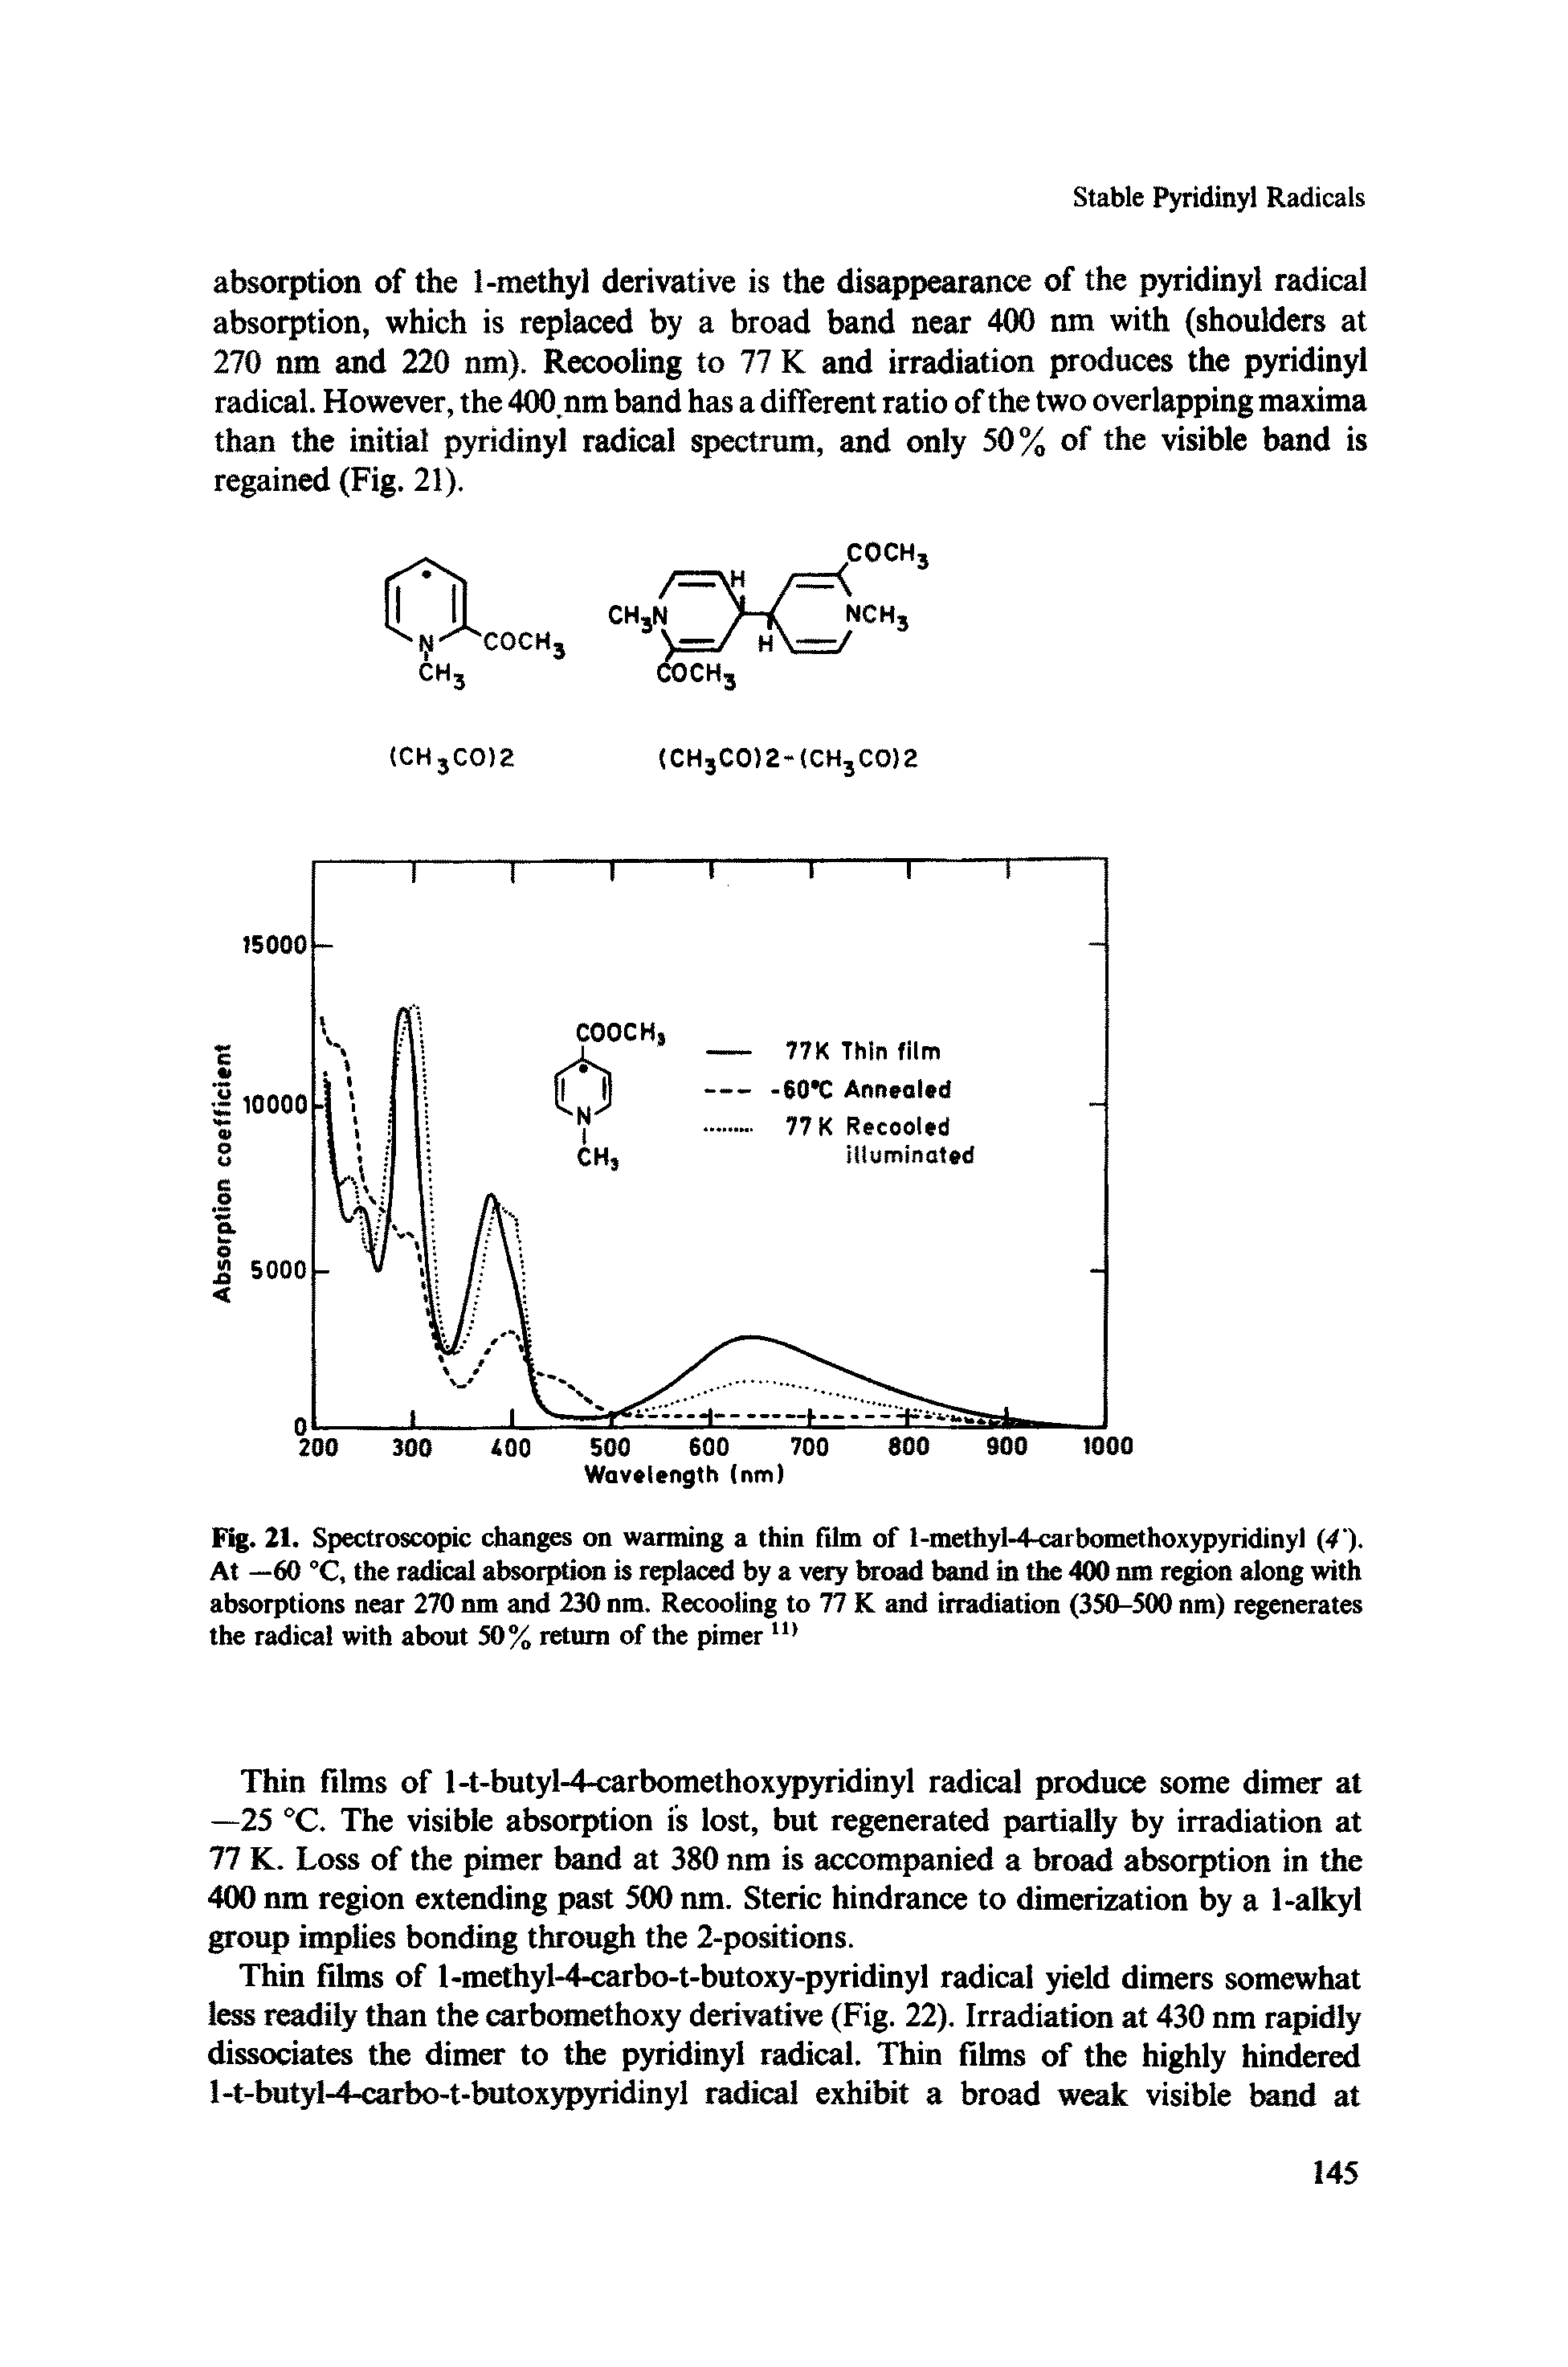 Fig. 21. Spectroscopic changes on warming a thin fdm of l-methyl-4-carbomethoxypyridinyl 4 ). At —60 °C, the radical absorption is replaced by a very broad band in the 400 nm region along with absorptions near 270 nm and 230 nm. Recooling to 77 K and irradiation (350-500 nm) regenerates the radical with about 50% return of the pimer...